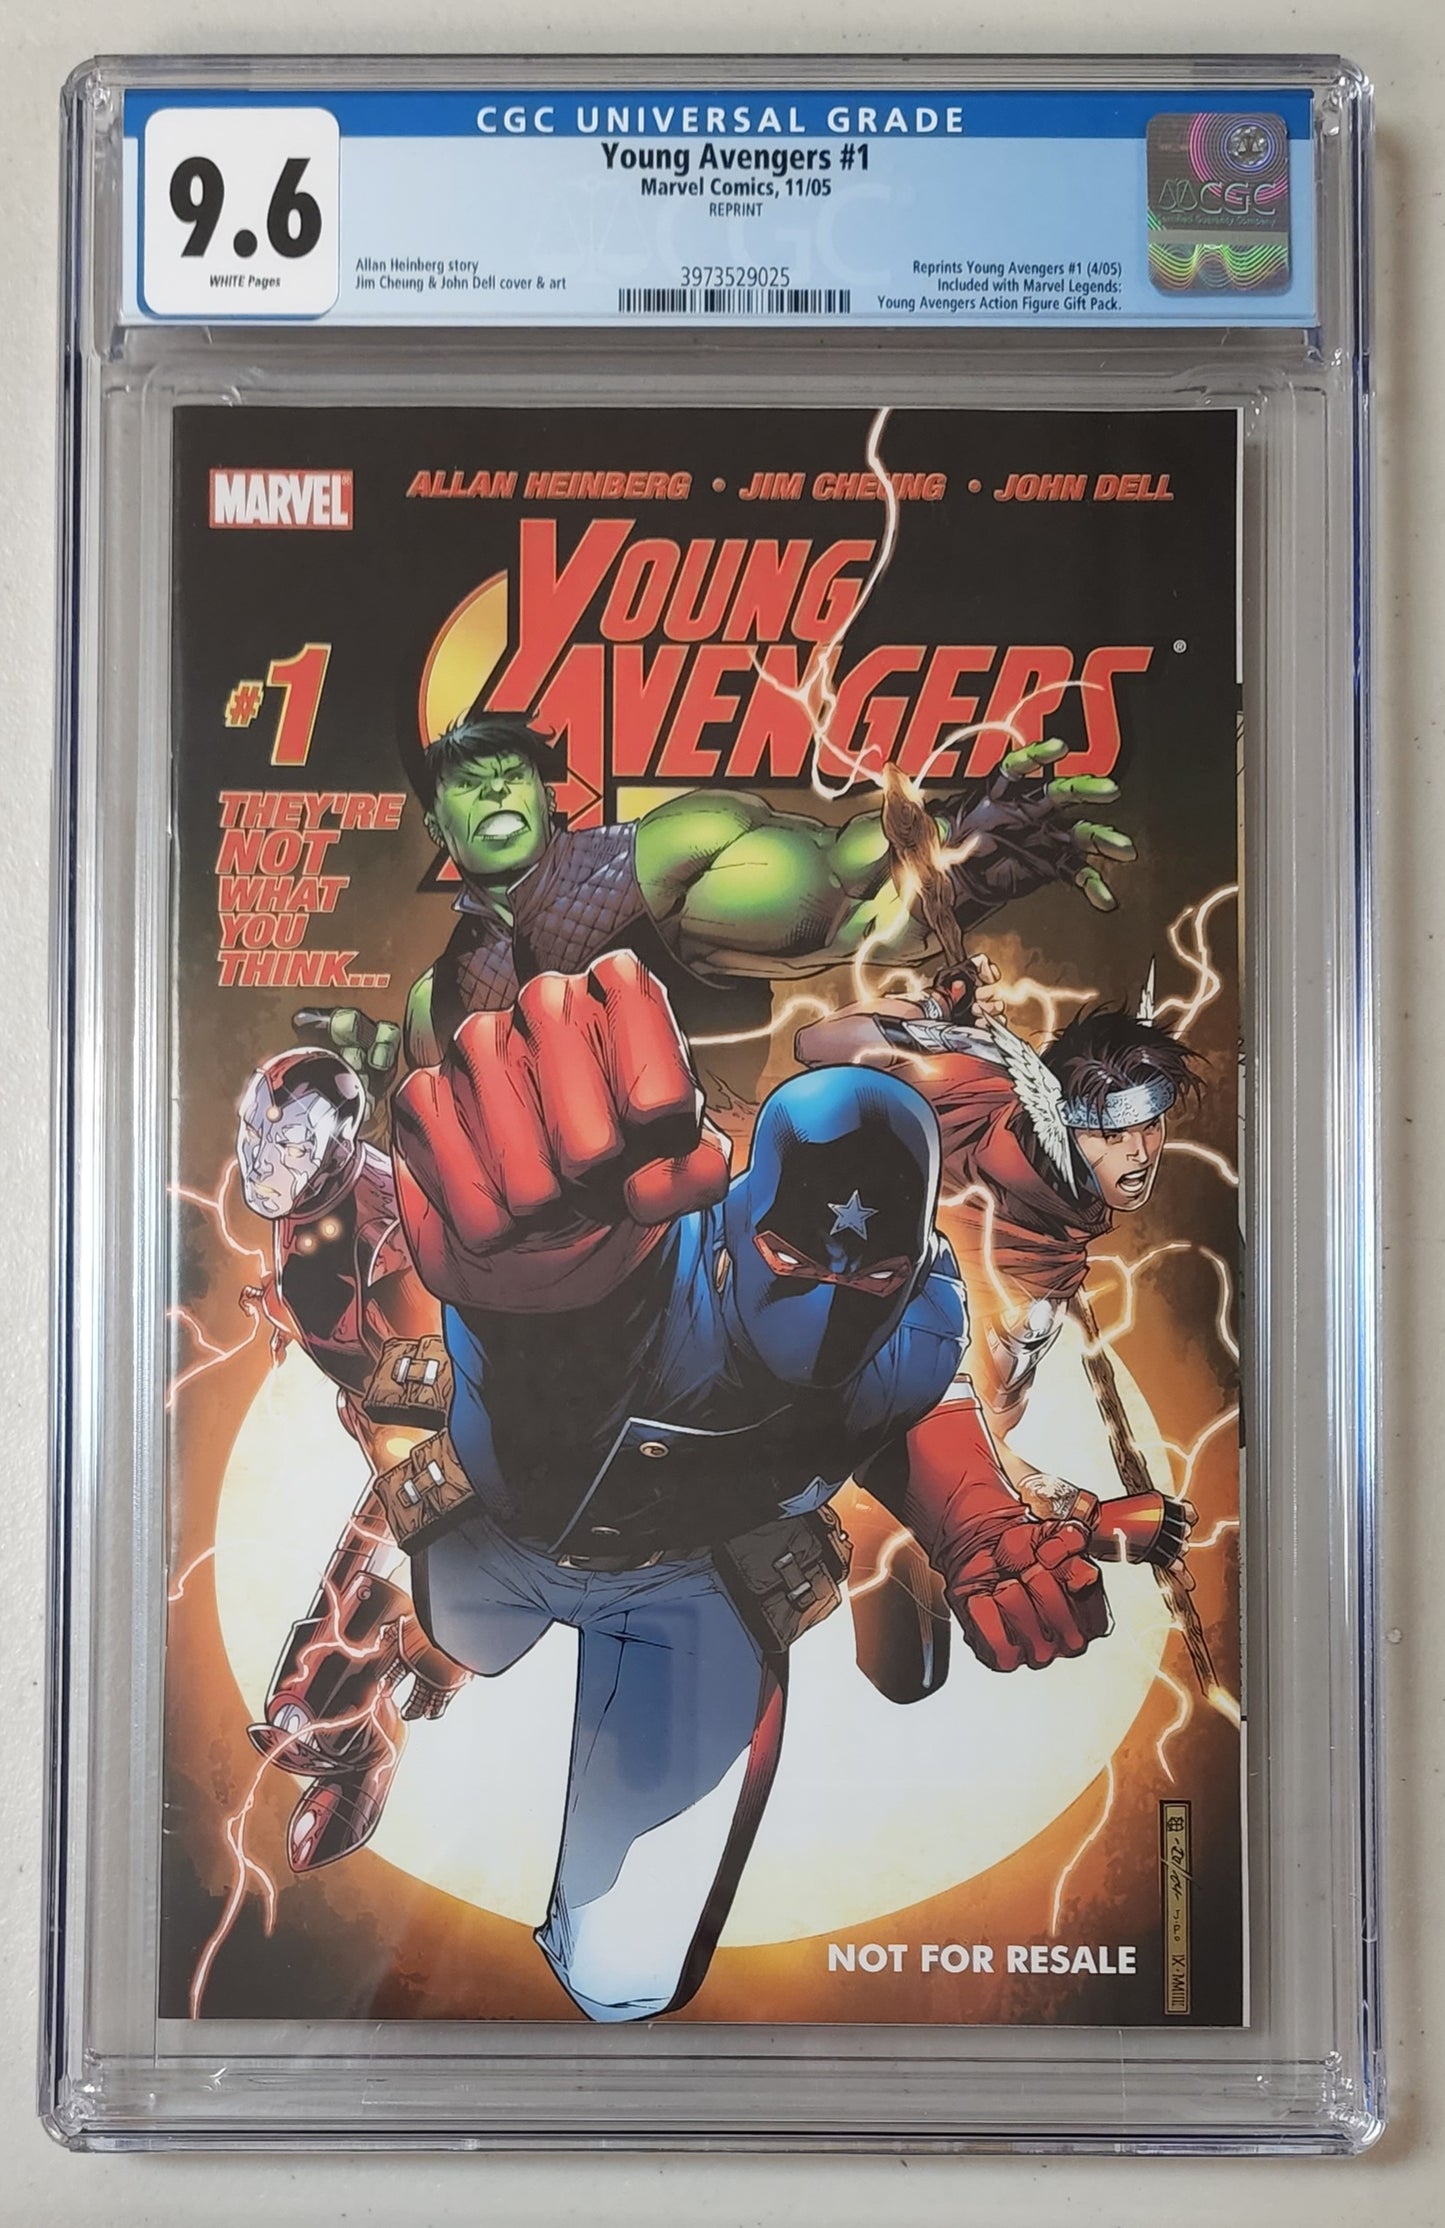 9.6 CGC YOUNG AVENGERS #1 REPRINT (1ST APP YOUNG AVENGERS.  INCLUDED WITH MARVEL LEGENDS YA AF GIFT PACK) 2005 [3973529025]